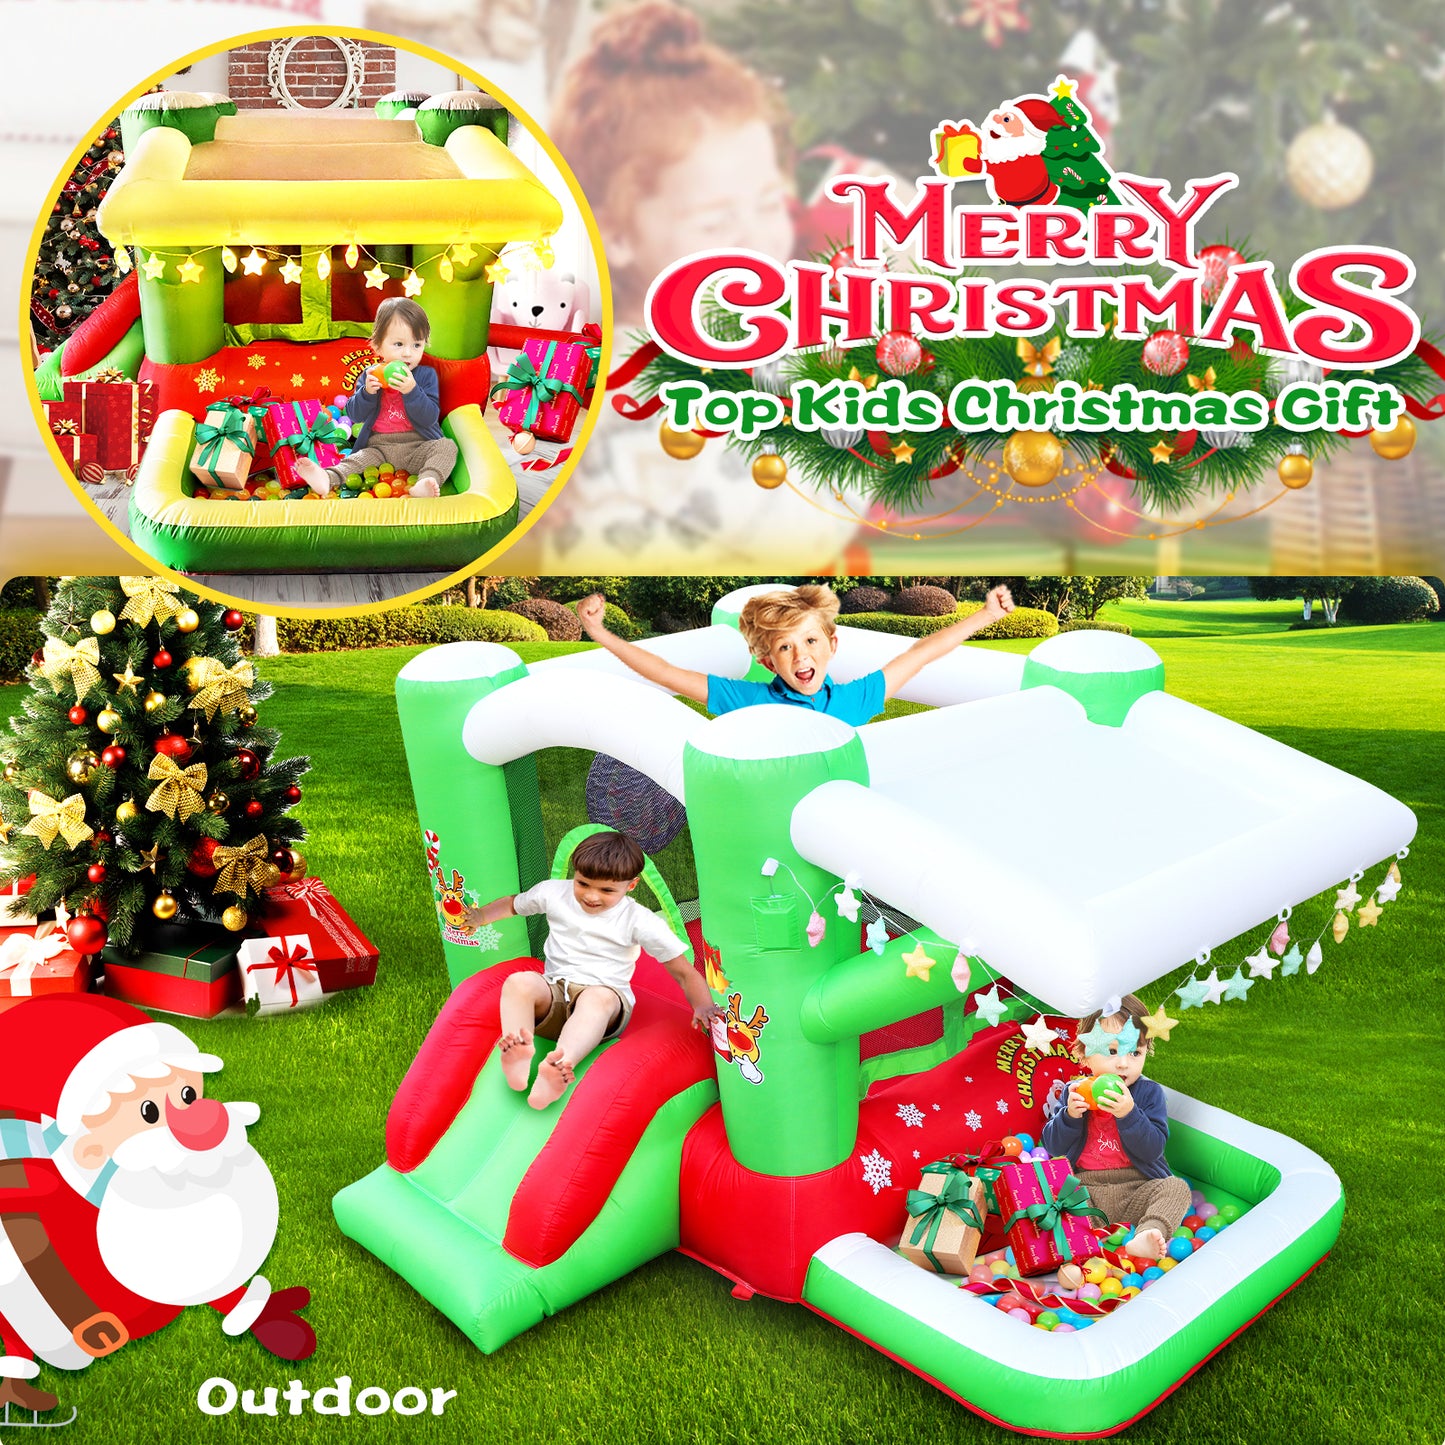 Christmas Jump 'n Slide Inflatable Bouncer for Kids Complete Setup with Blower - 80" x 91" Play Area - 55" Tall